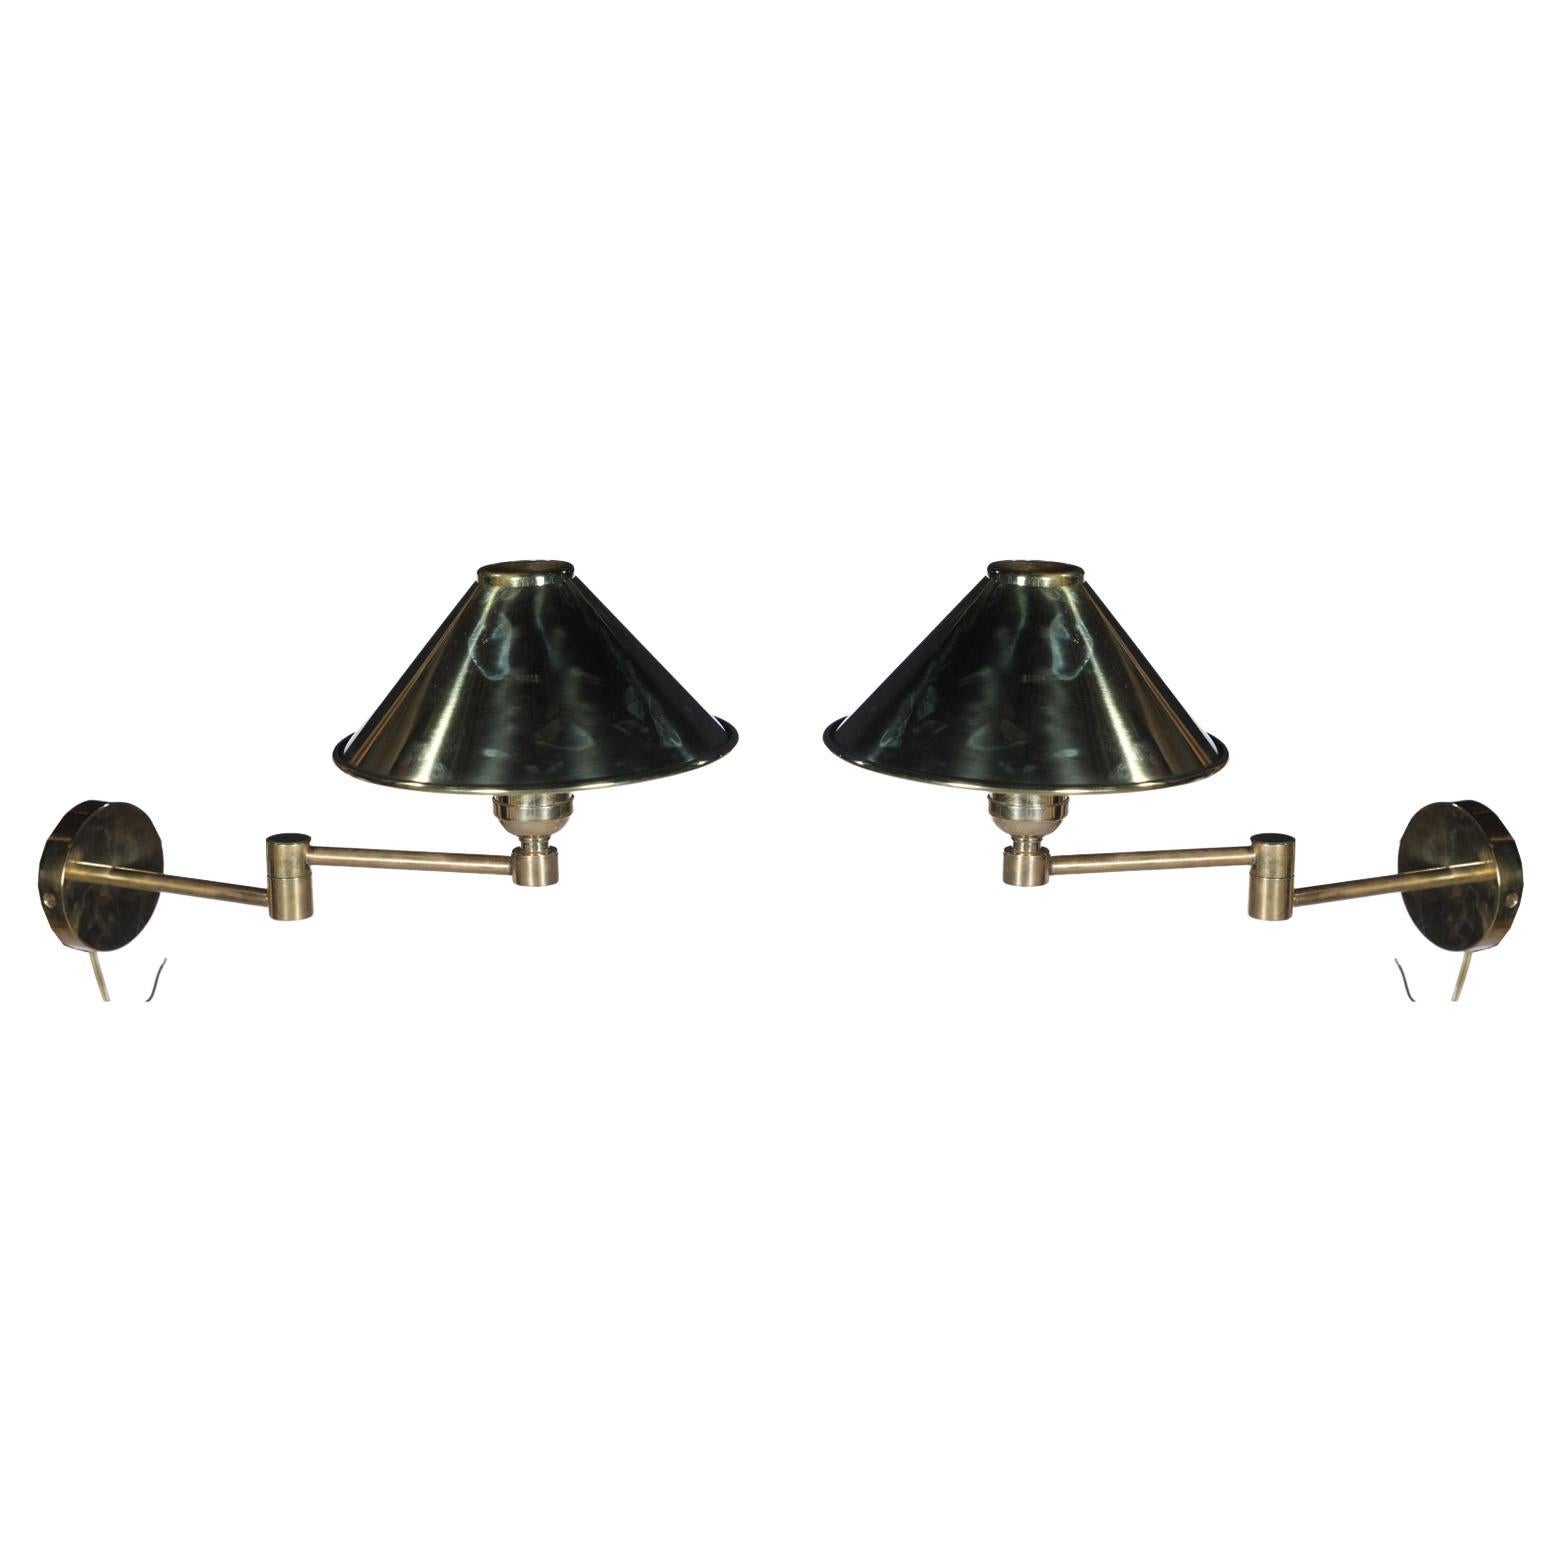 Pair of Brass Swing Arm Sconces from Ship's Stateroom For Sale